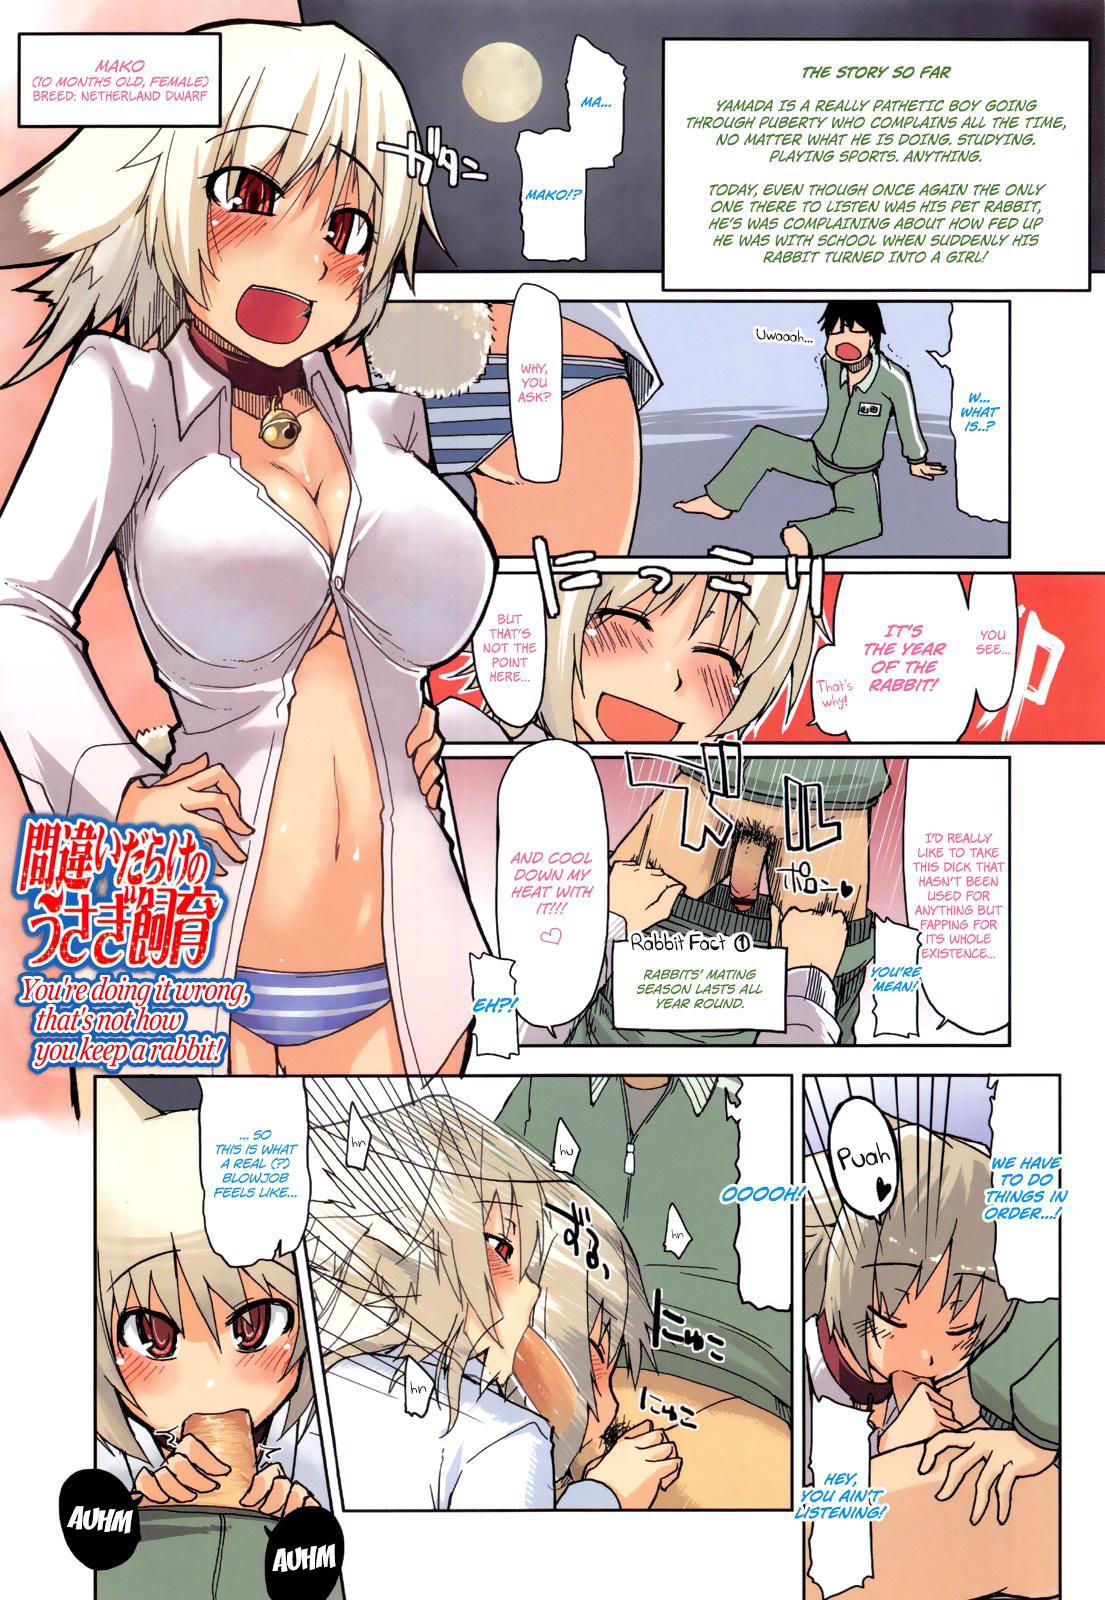 Gemendo [Ryo] How To Eat Delicious Meat - Chapters 1 - 6 [English] =Anonymous + maipantsu + EroMangaGirls= Best Blow Job Ever - Page 12